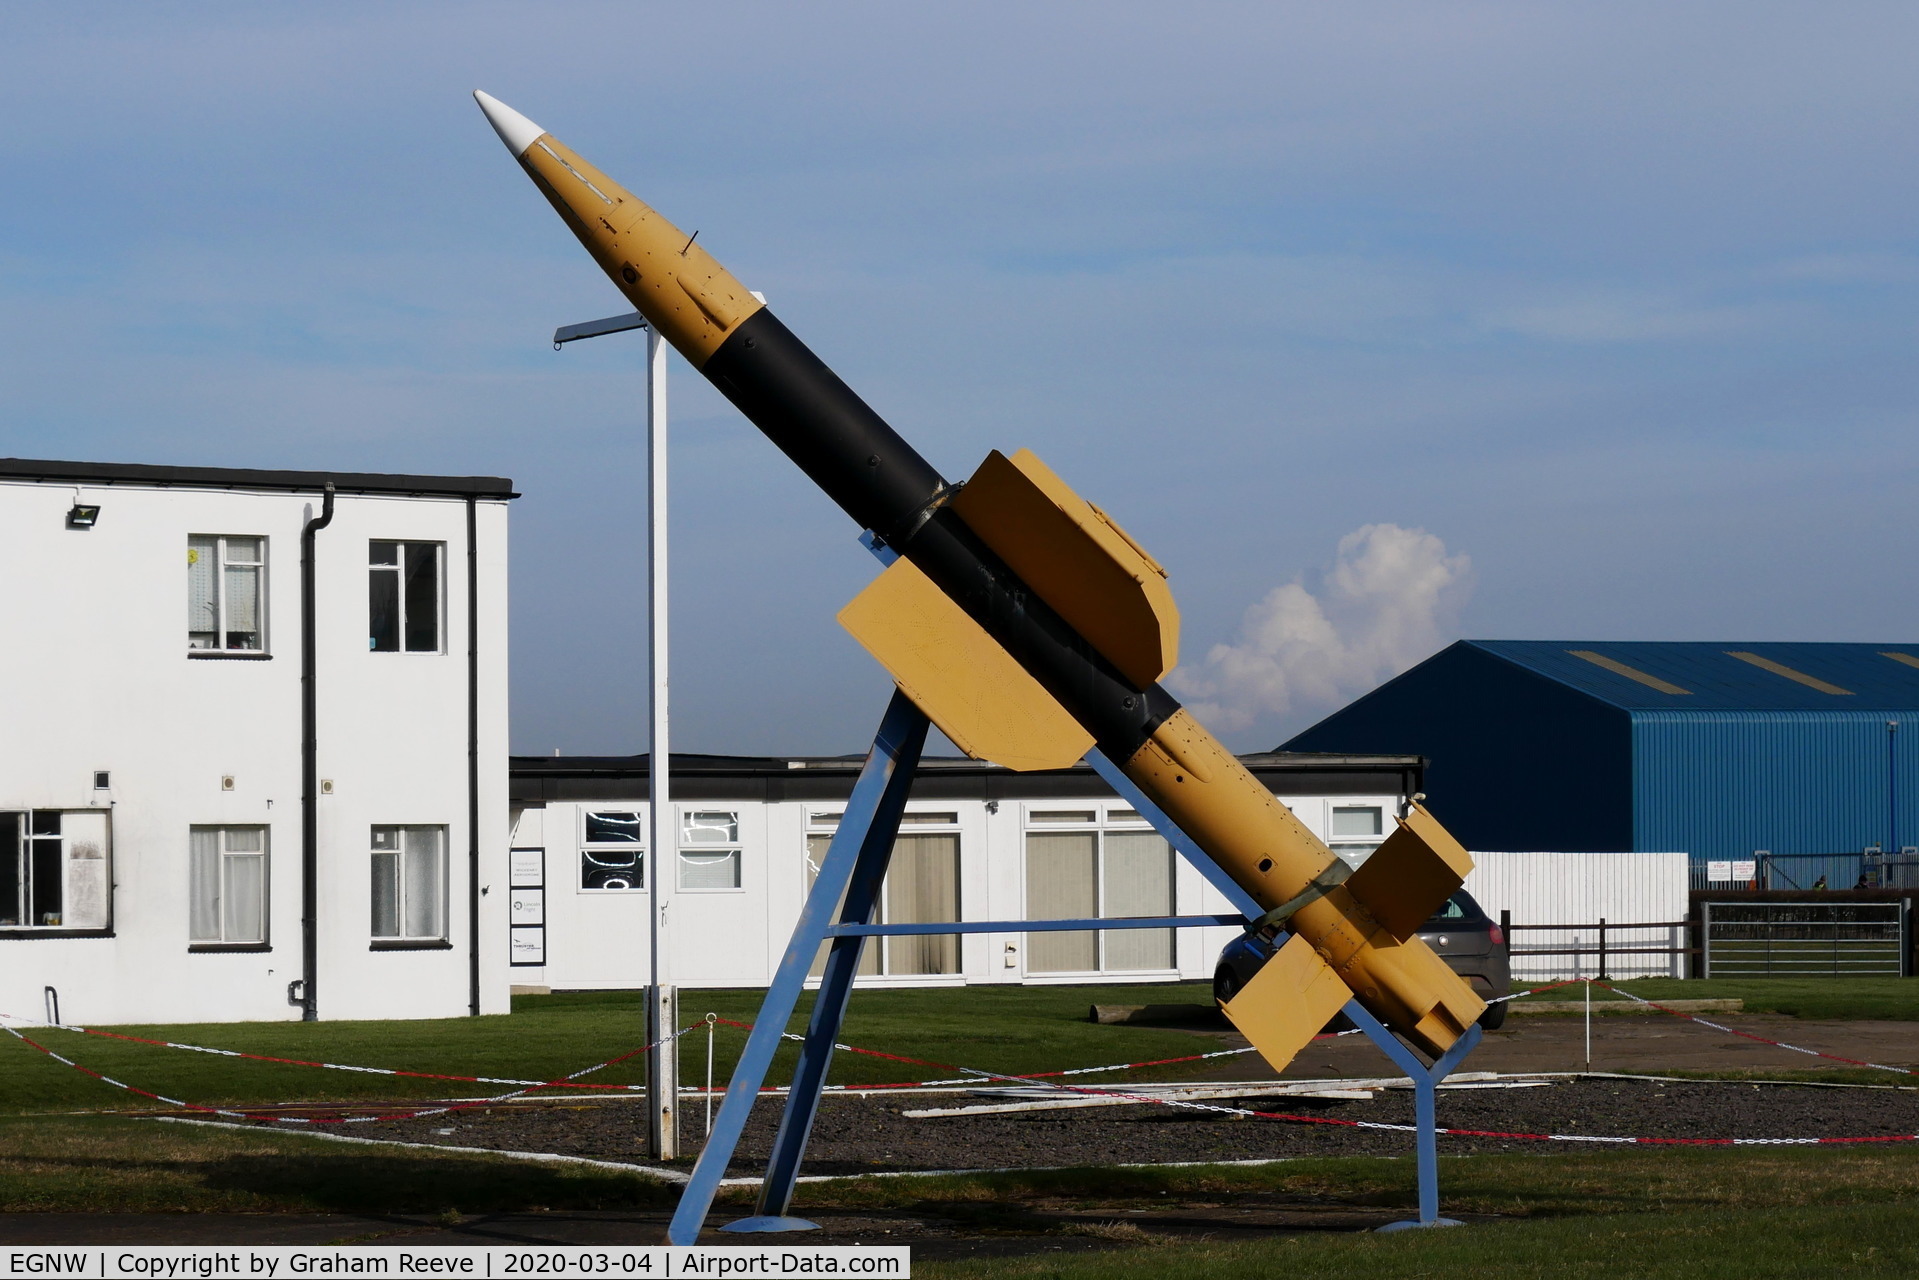 Wickenby Aerodrome Airport, Lincoln, England United Kingdom (EGNW) - Missile on display next to the control tower at Wickenby.